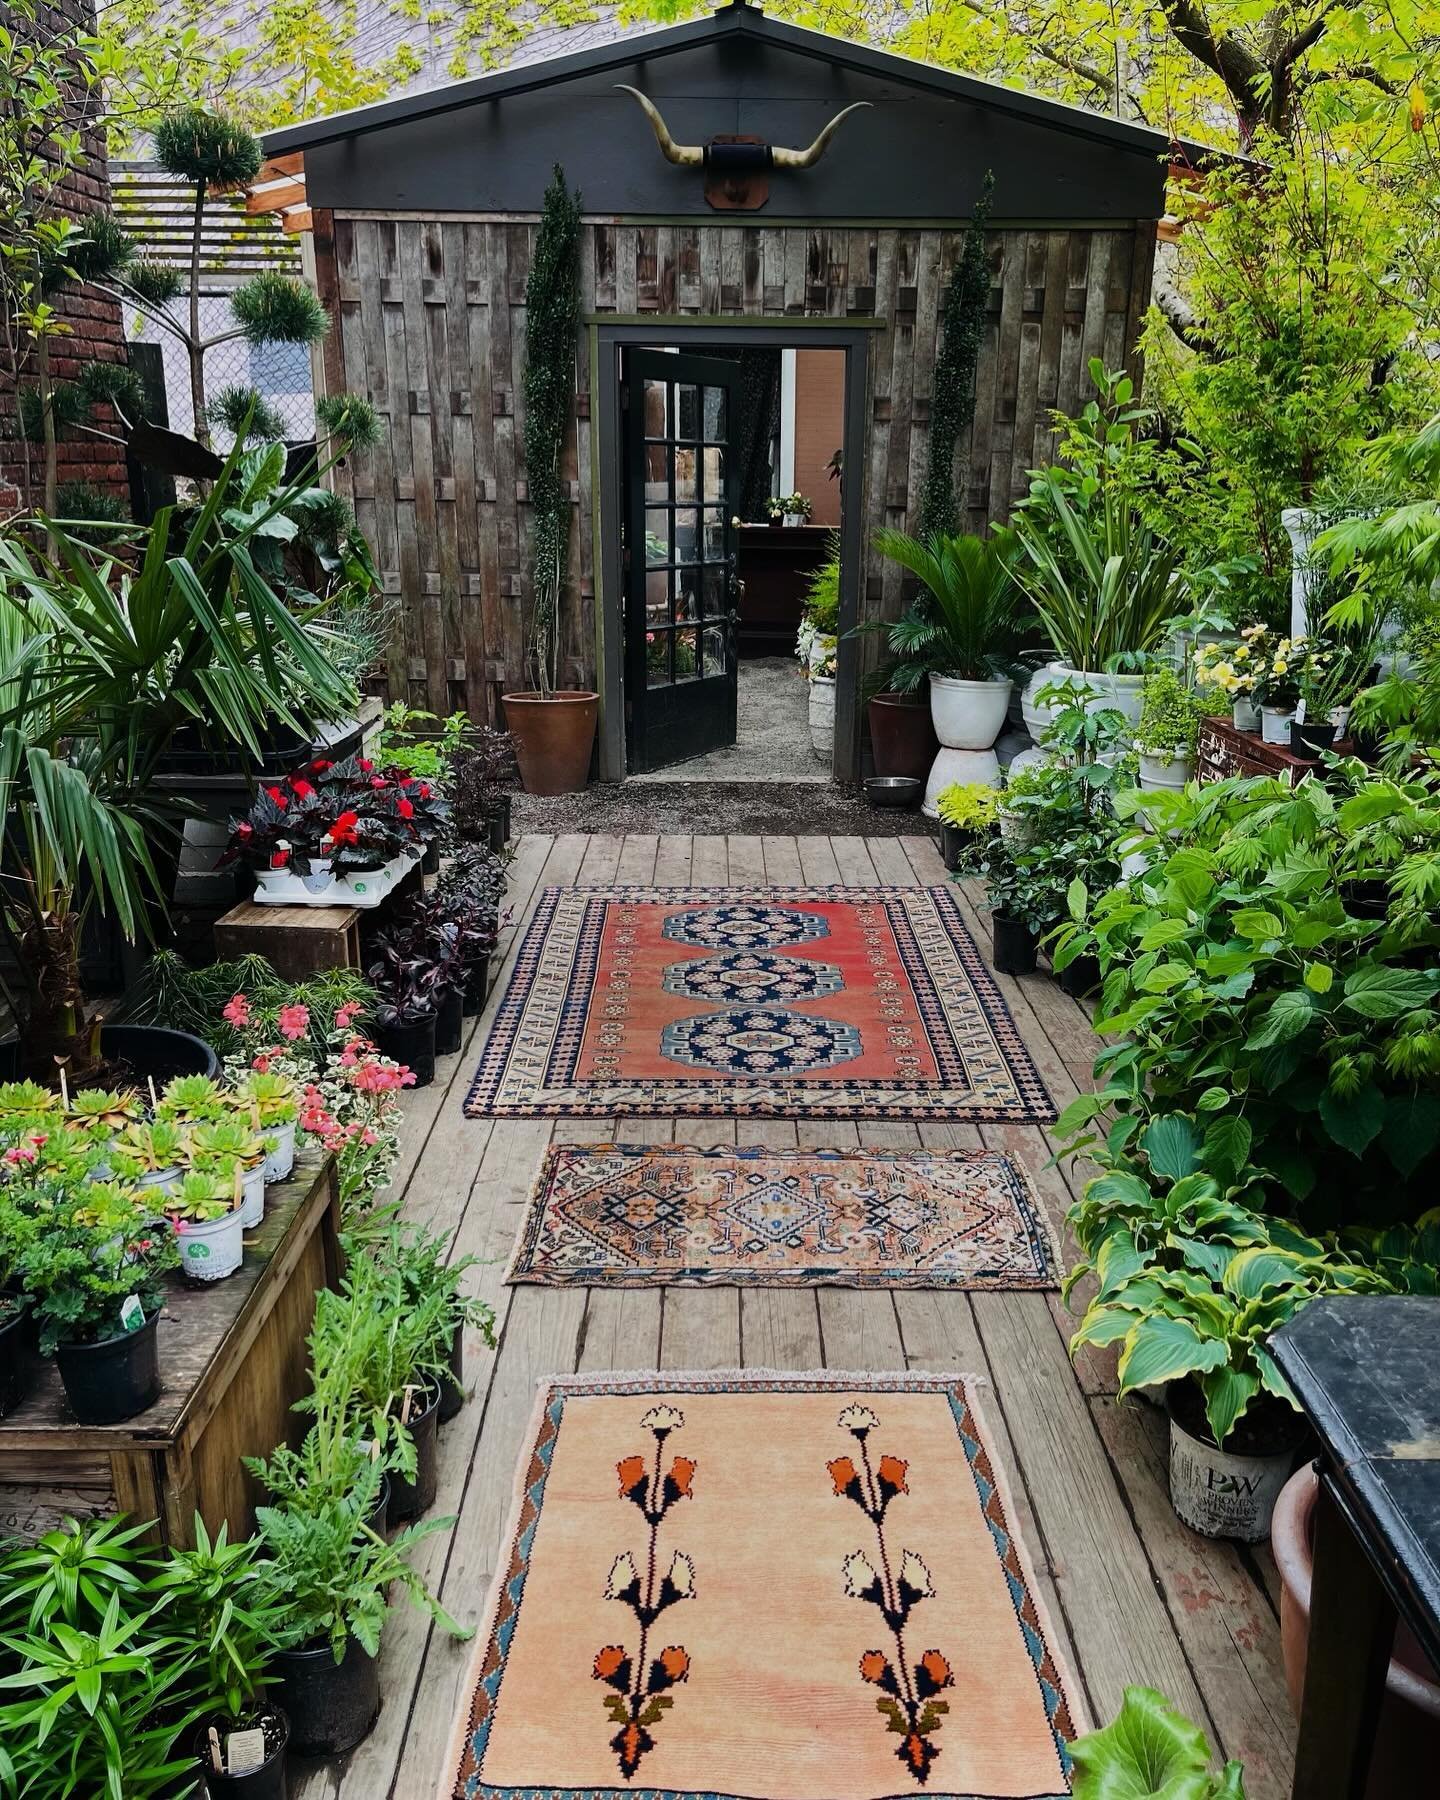 I&rsquo;m excited to share that Saturday May 11th we will be at our good friend Justin&rsquo;s garden shop @blokepdx celebrating Mothers Day weekend with some very special rugs and art that I have been squirreling away for this very special day. Just